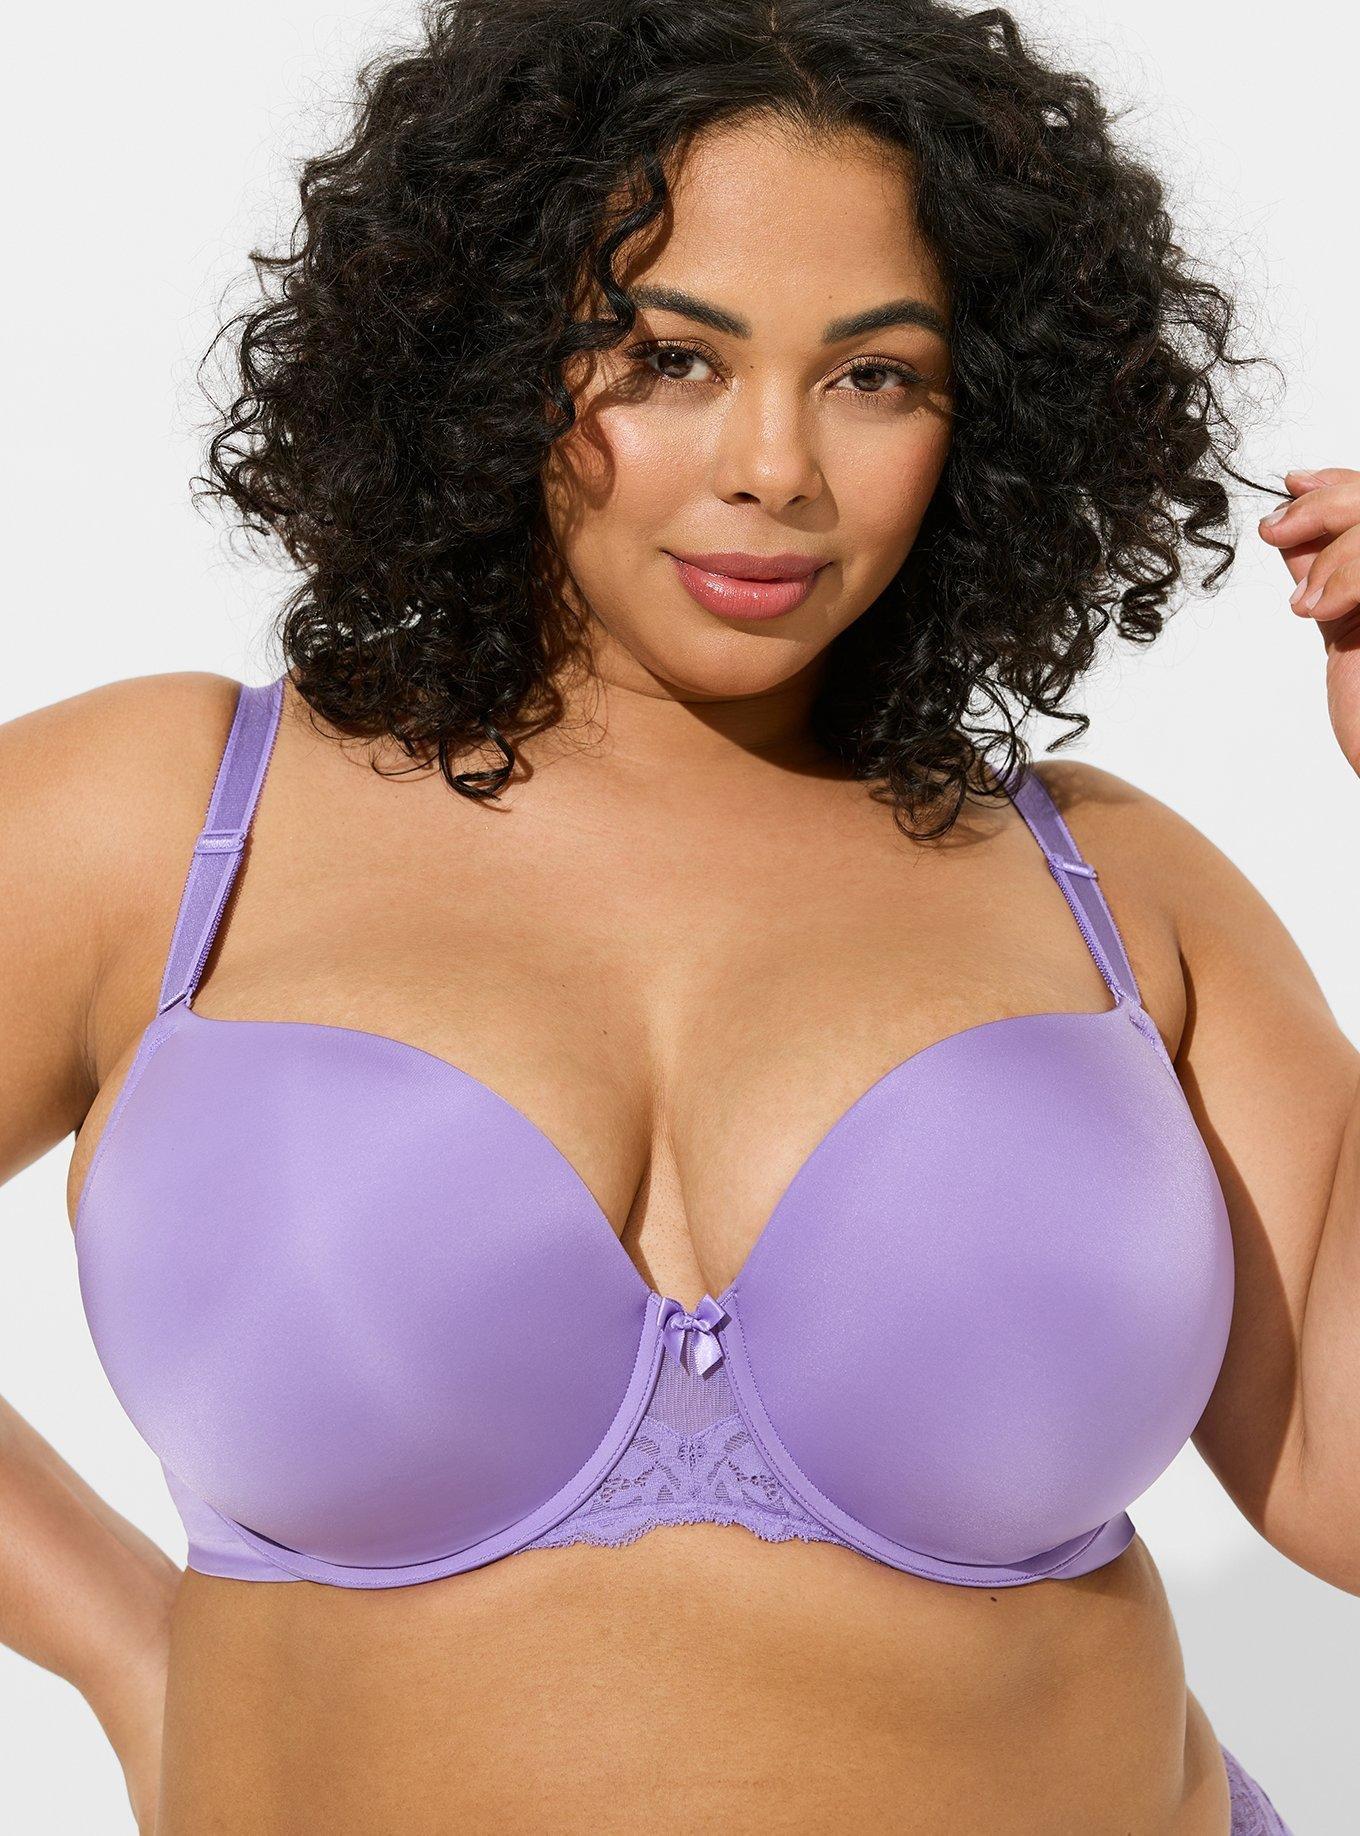 T-Shirt Bras 48D, Bras for Large Breasts